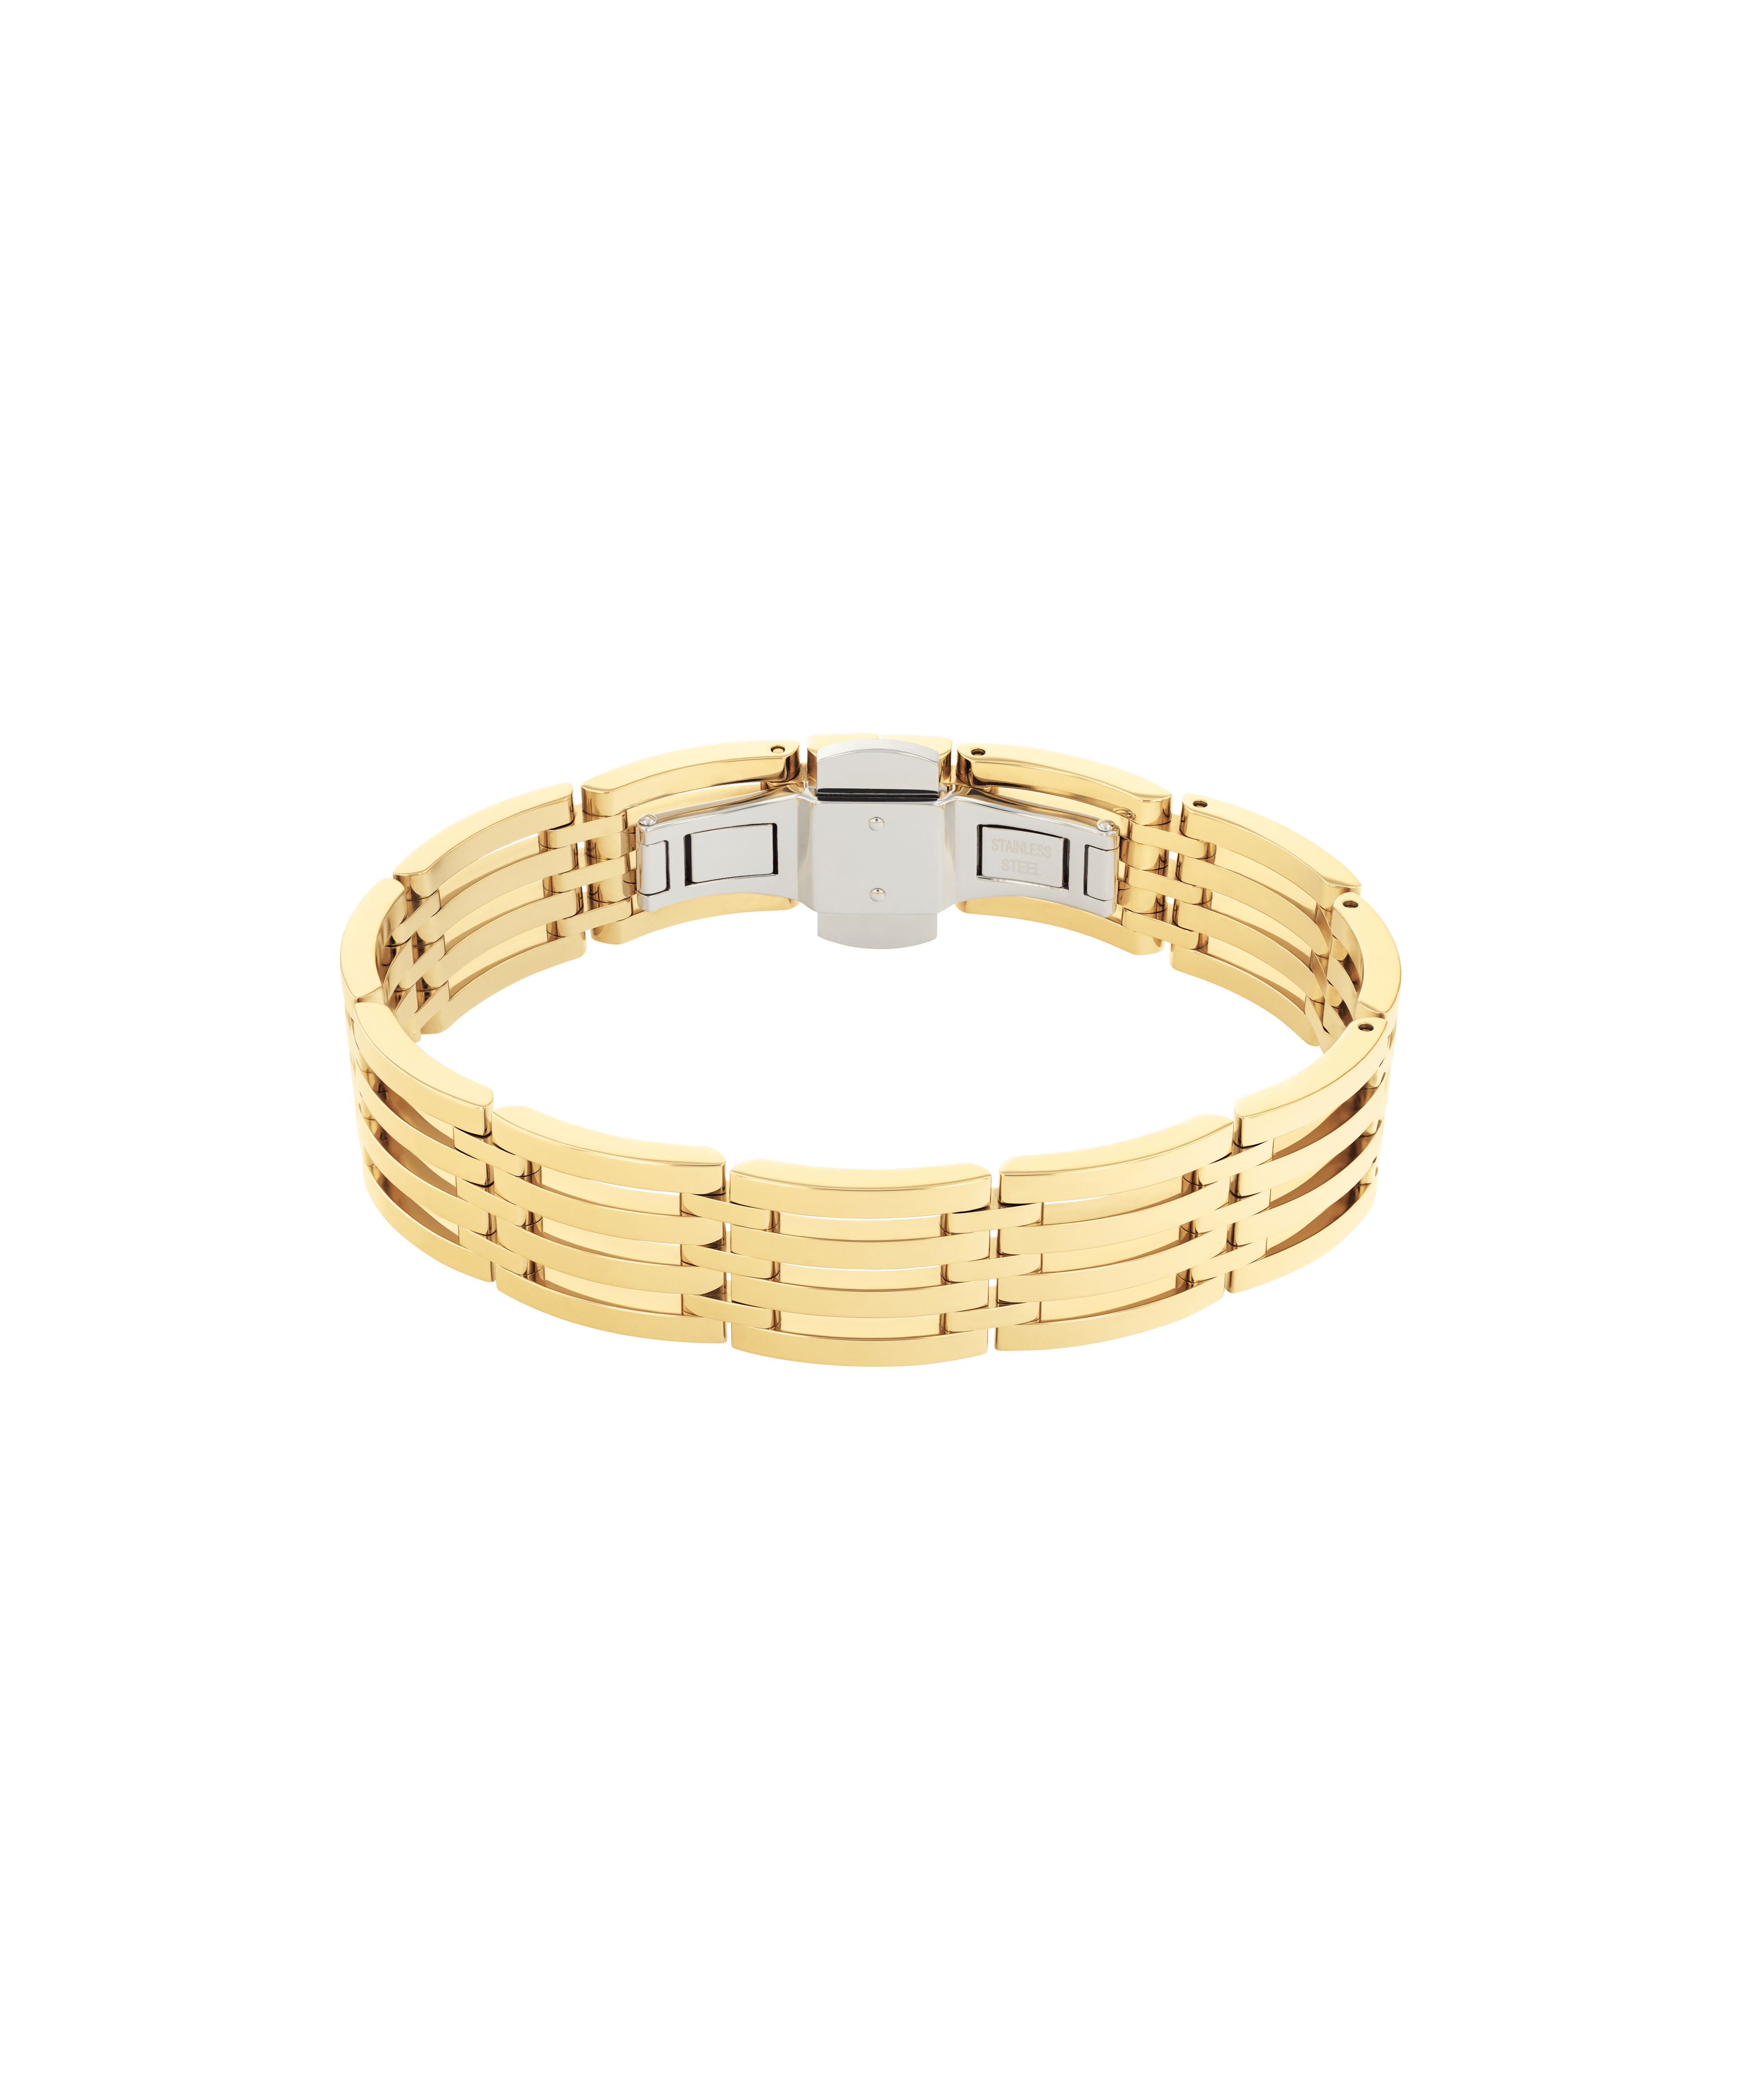 14K Yellow Gold Polished and Satin 8.75-inch Men's Link Bracelet - 1CYM2A